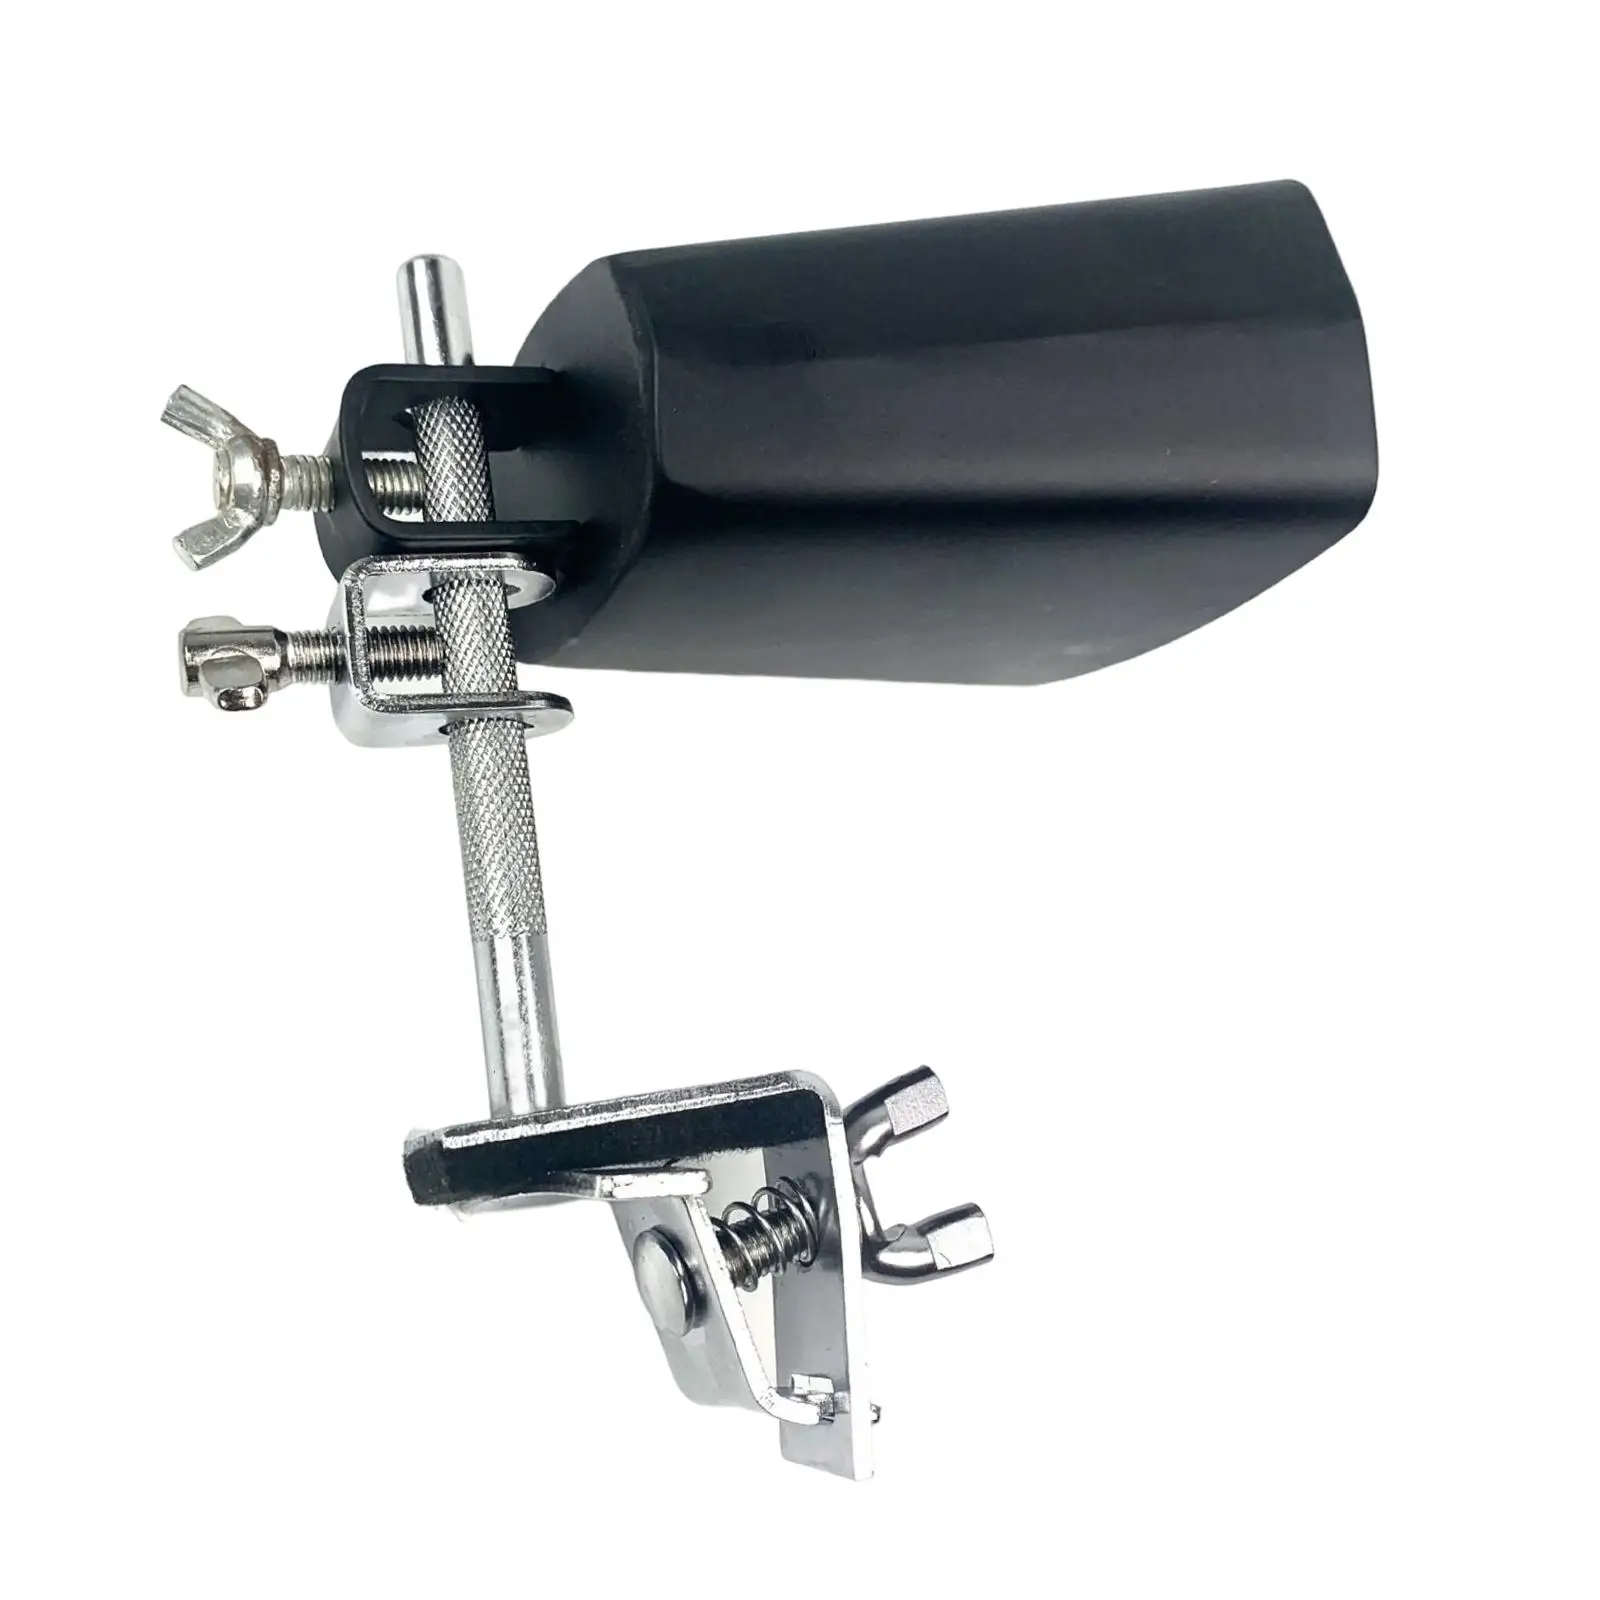 Metal Cowbell Clamp Holder with Cowbell Percussion Instrument Noise Maker